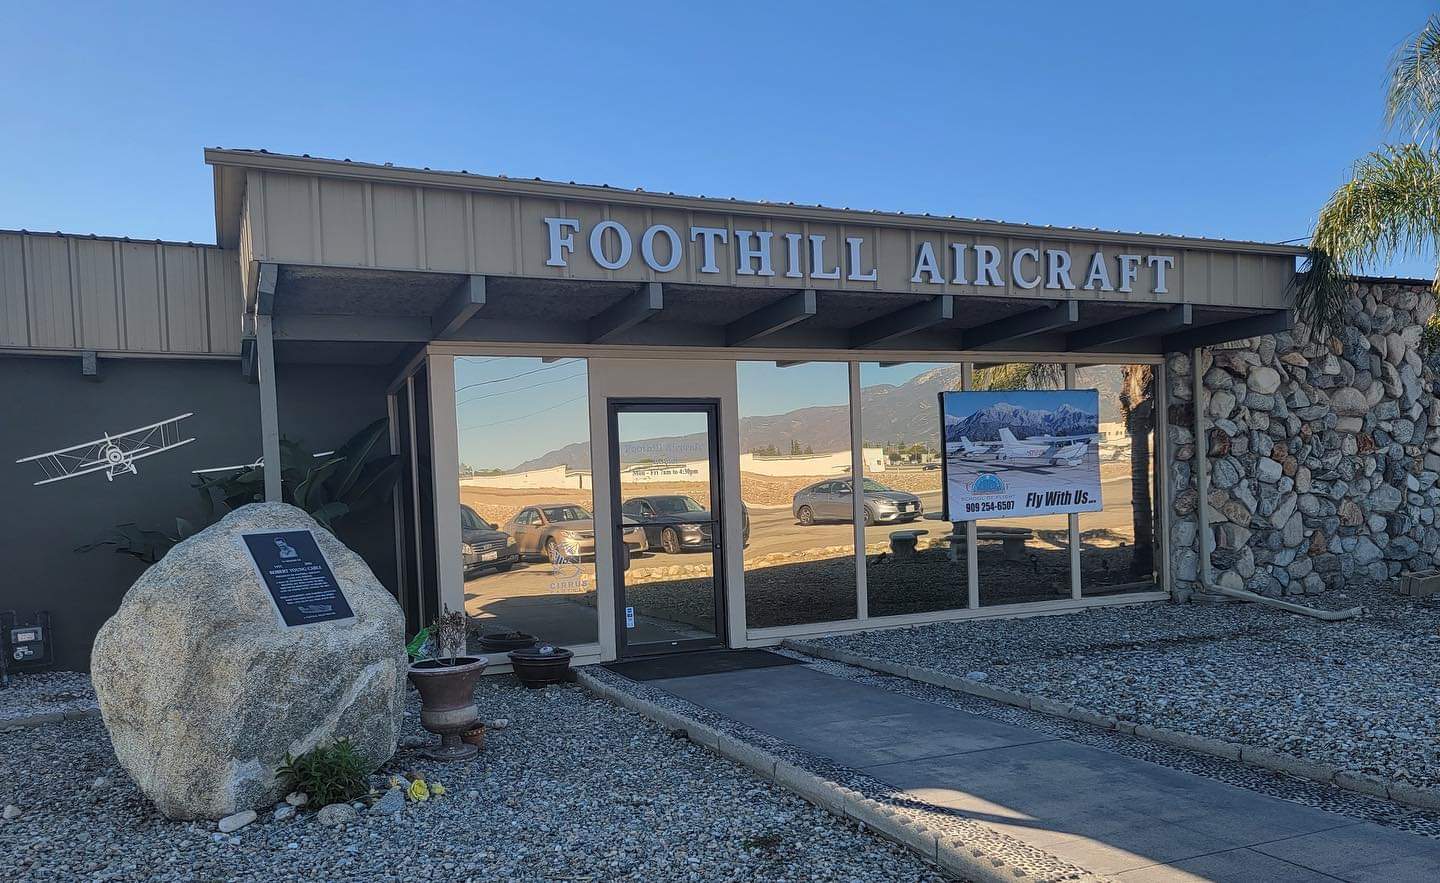 Foothill Aircraft